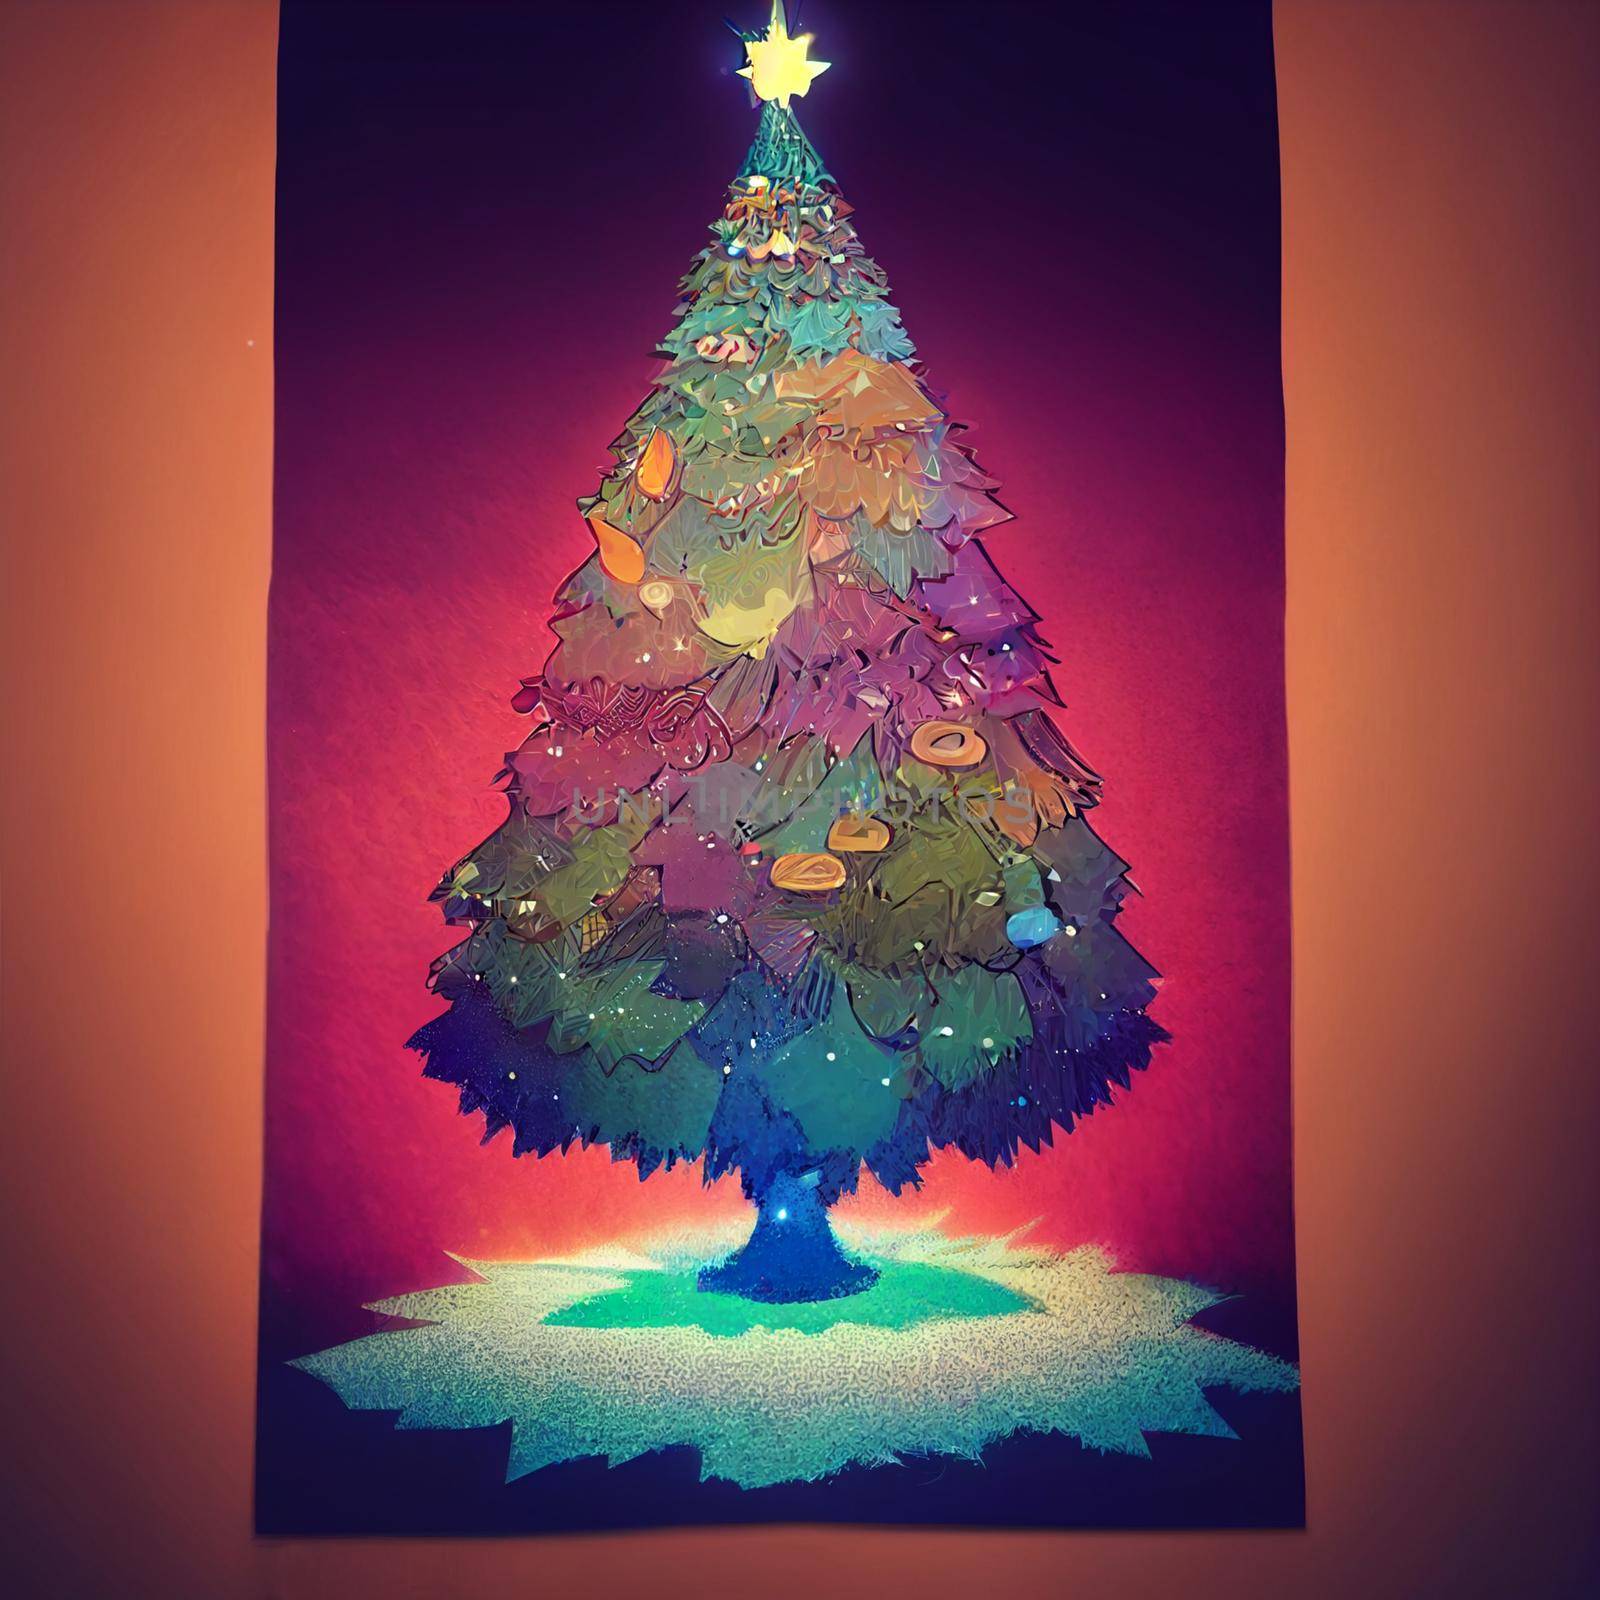 Colorful christmas tree illustration by NeuroSky